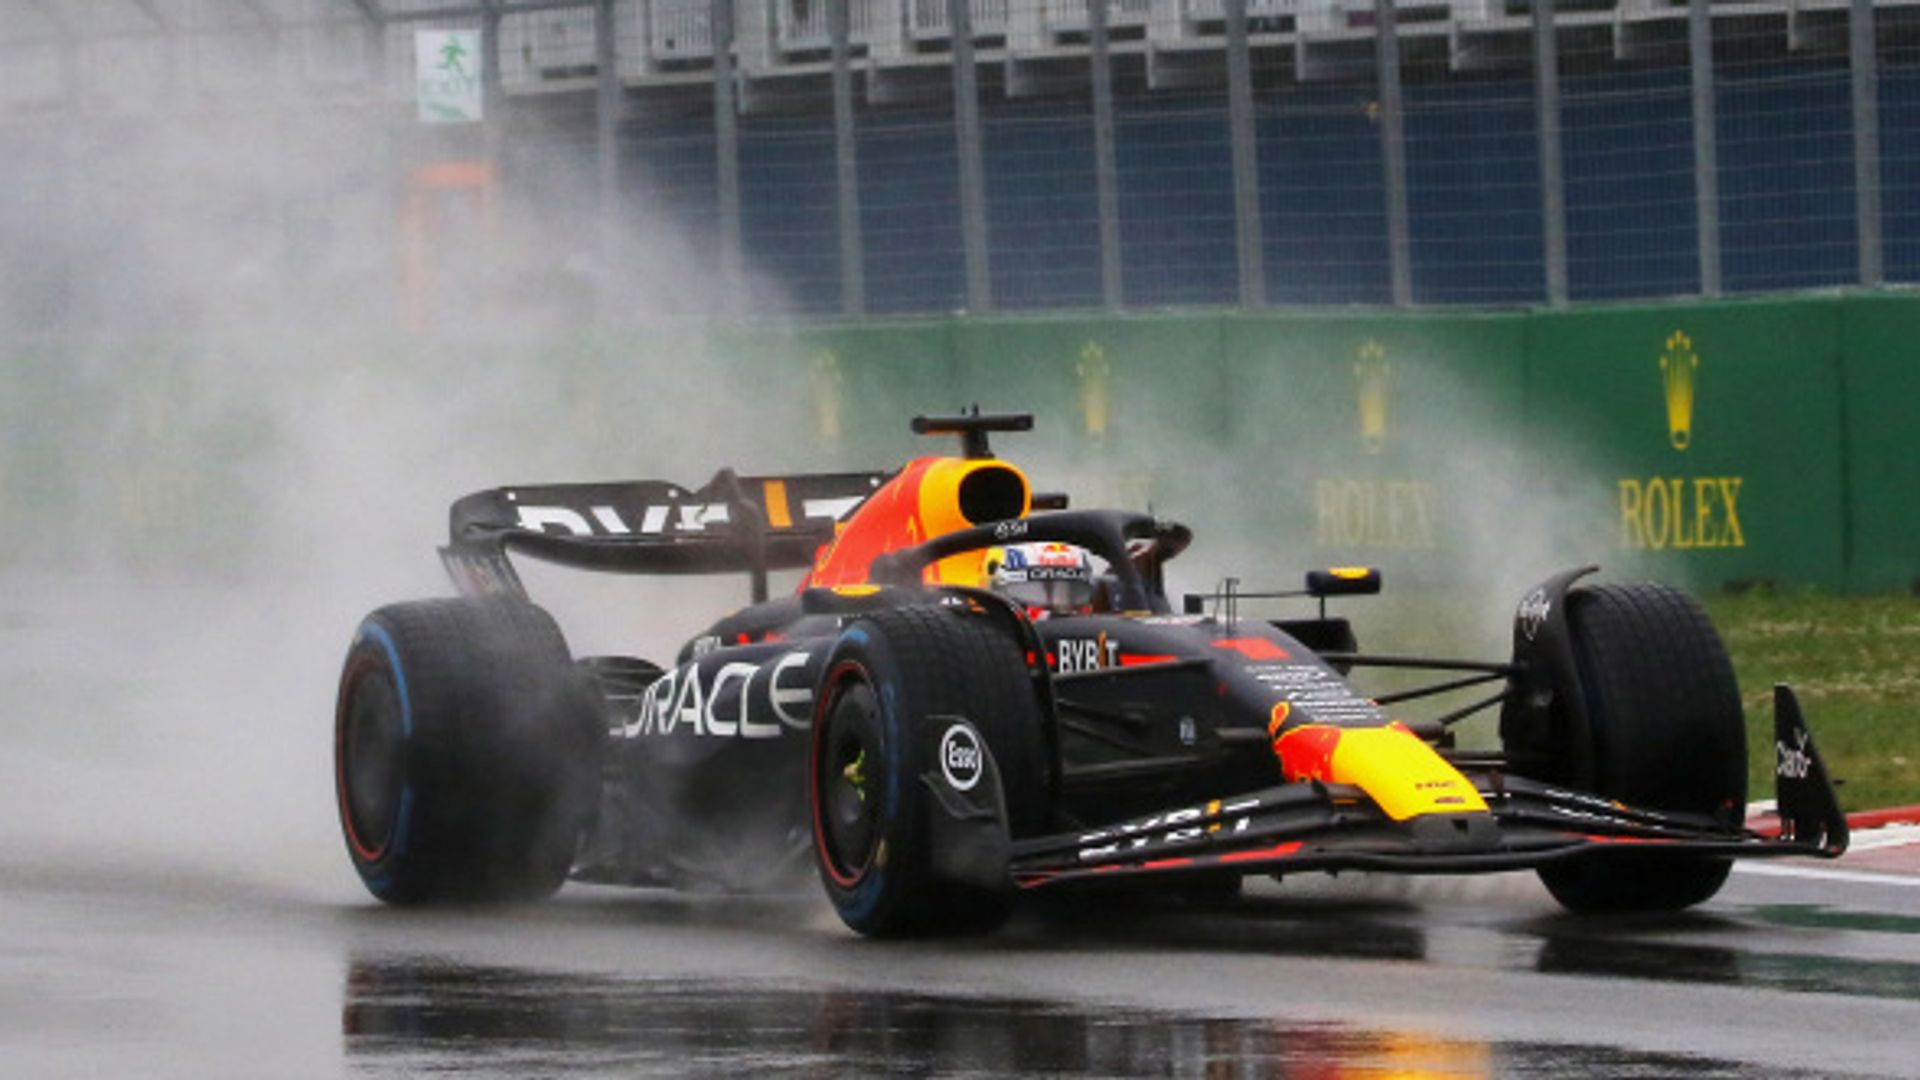 Verstappen on pole from Hulkenberg after dramatic Canada qualy